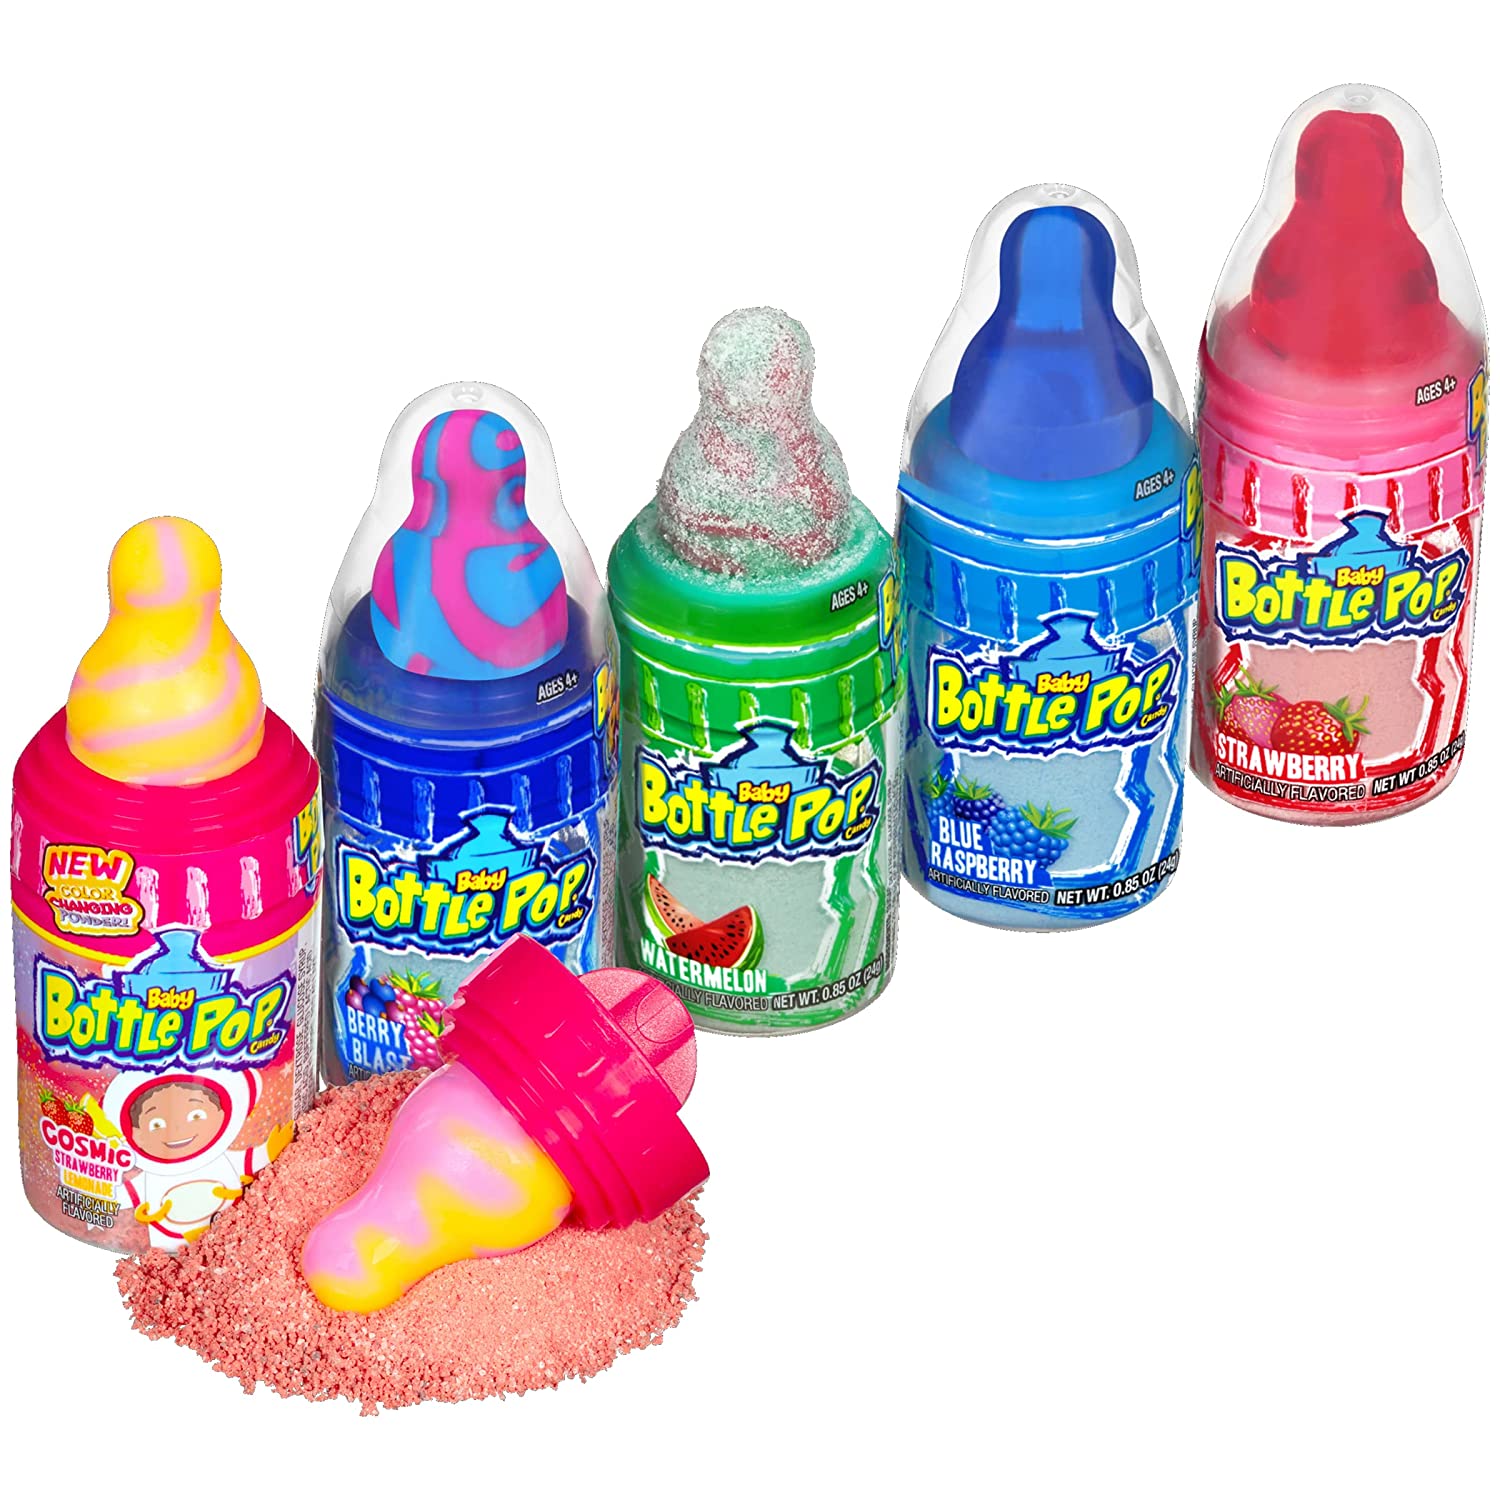 PUSH POP JUMBO – The Penny Candy Store